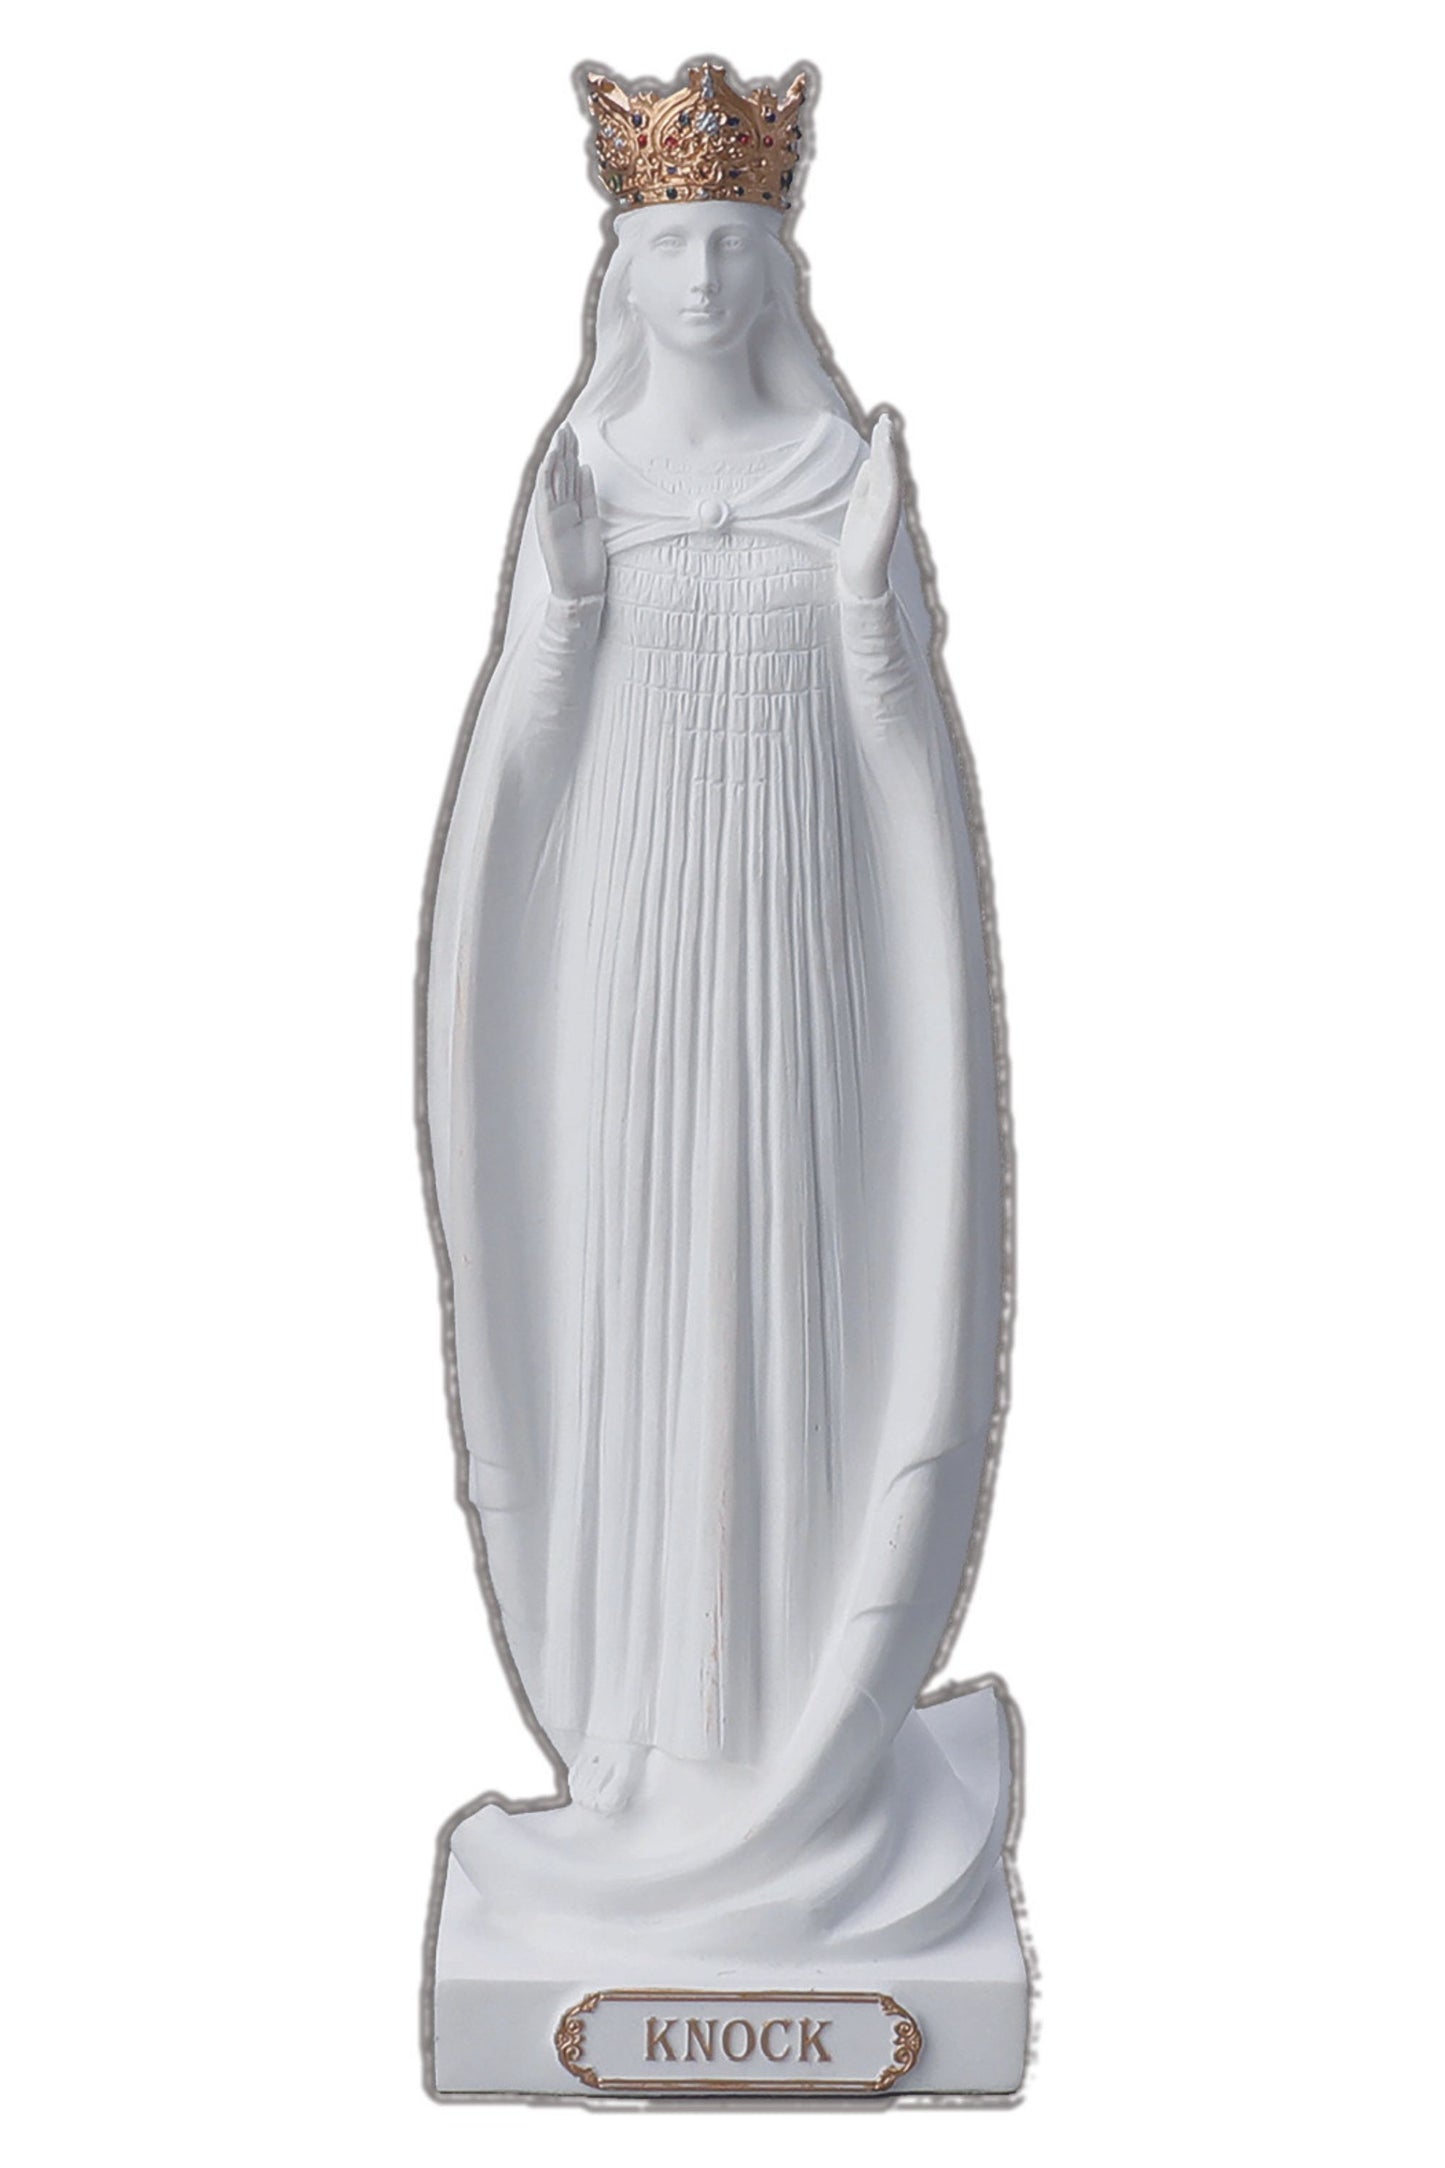 SR-76528-W Our Lady of Knock in White 8.5"